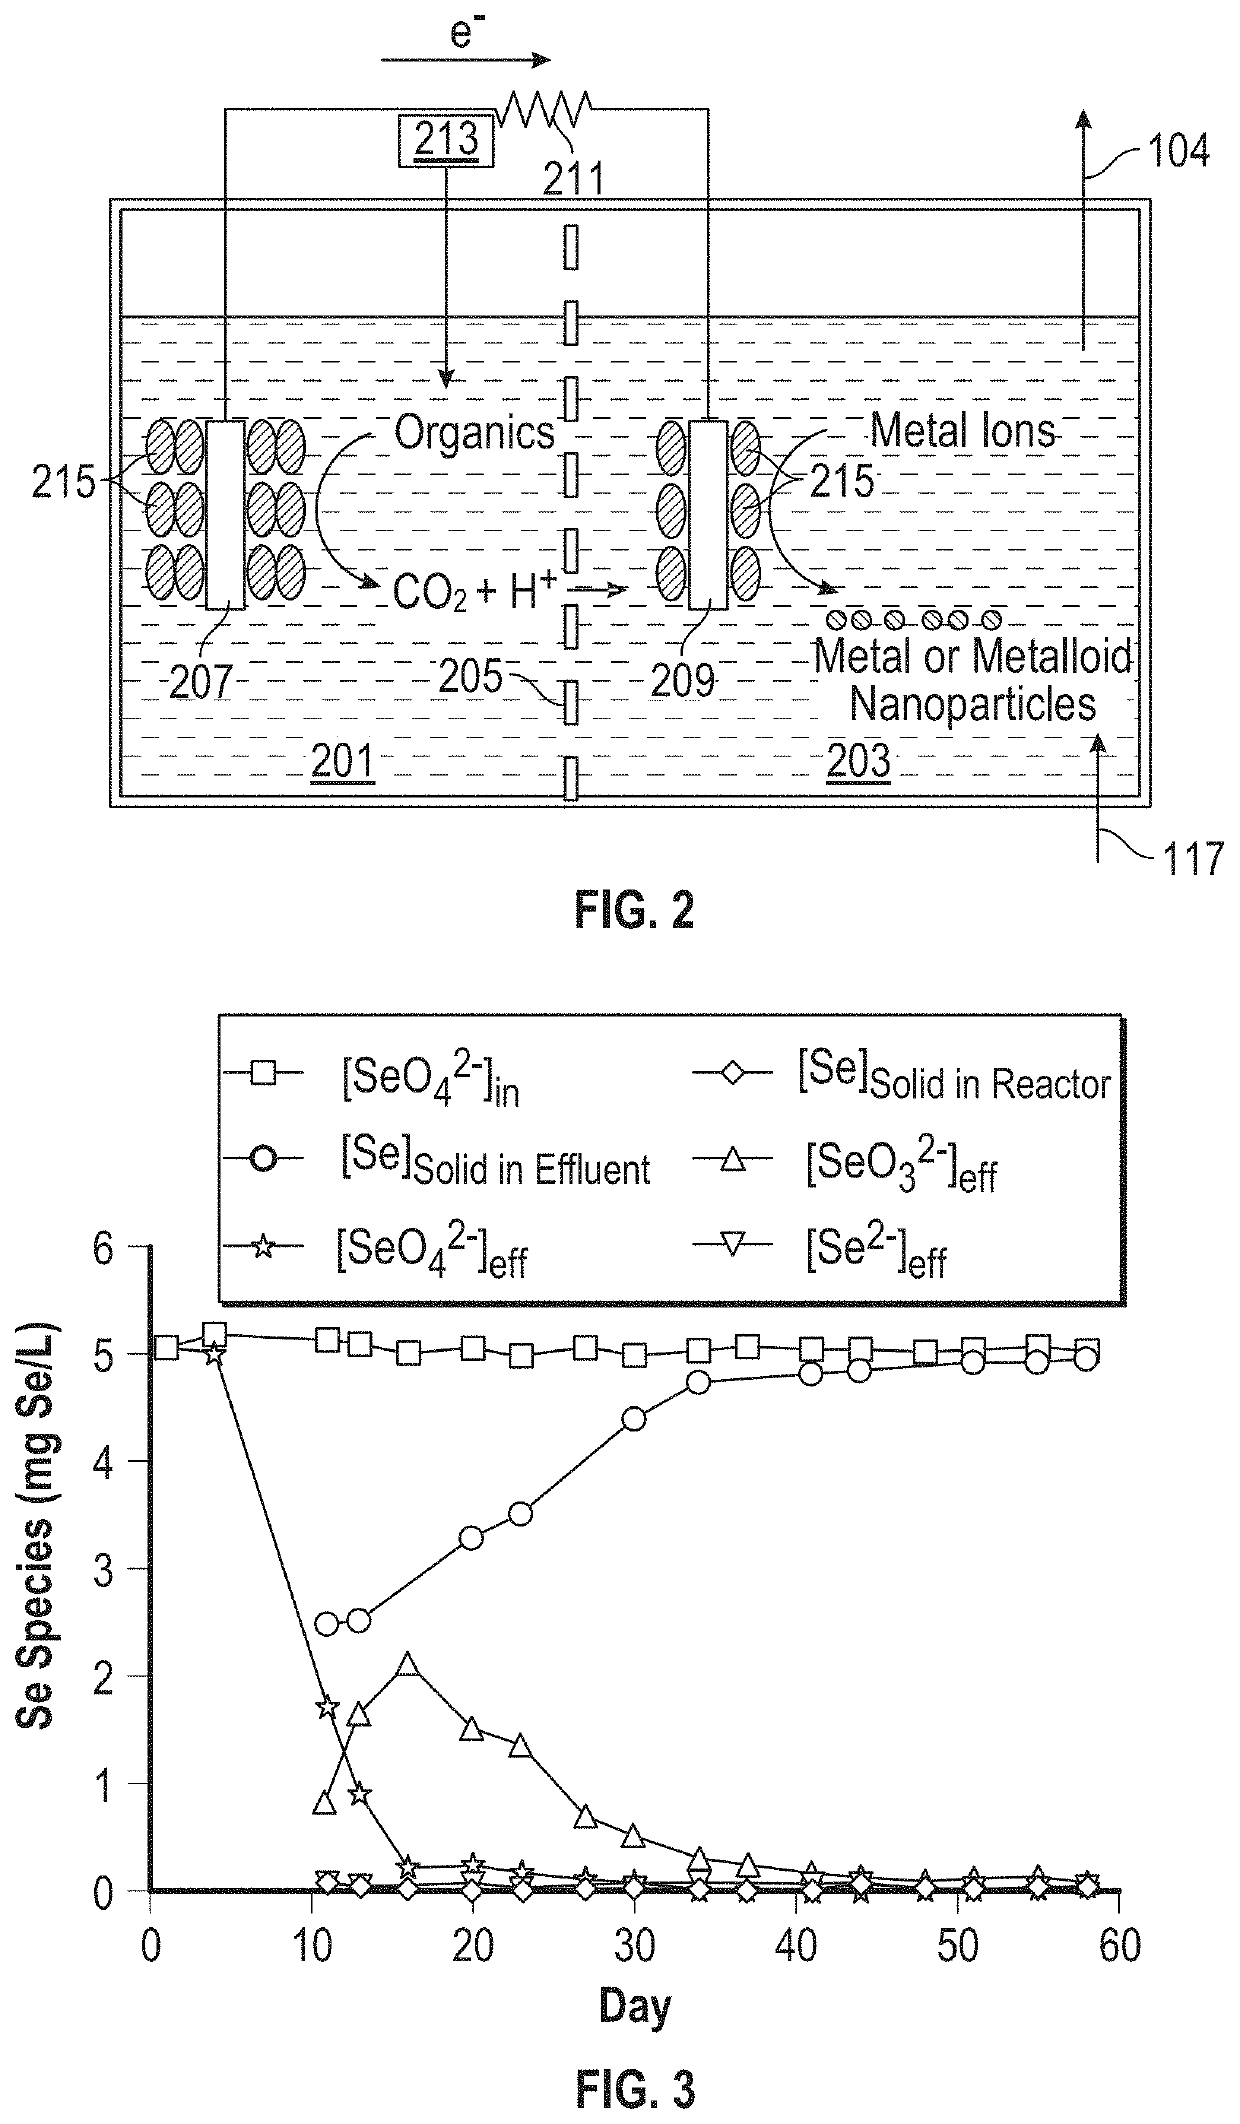 Reactors and methods for producing and recovering extracellular metal or metalloid nanoparticles